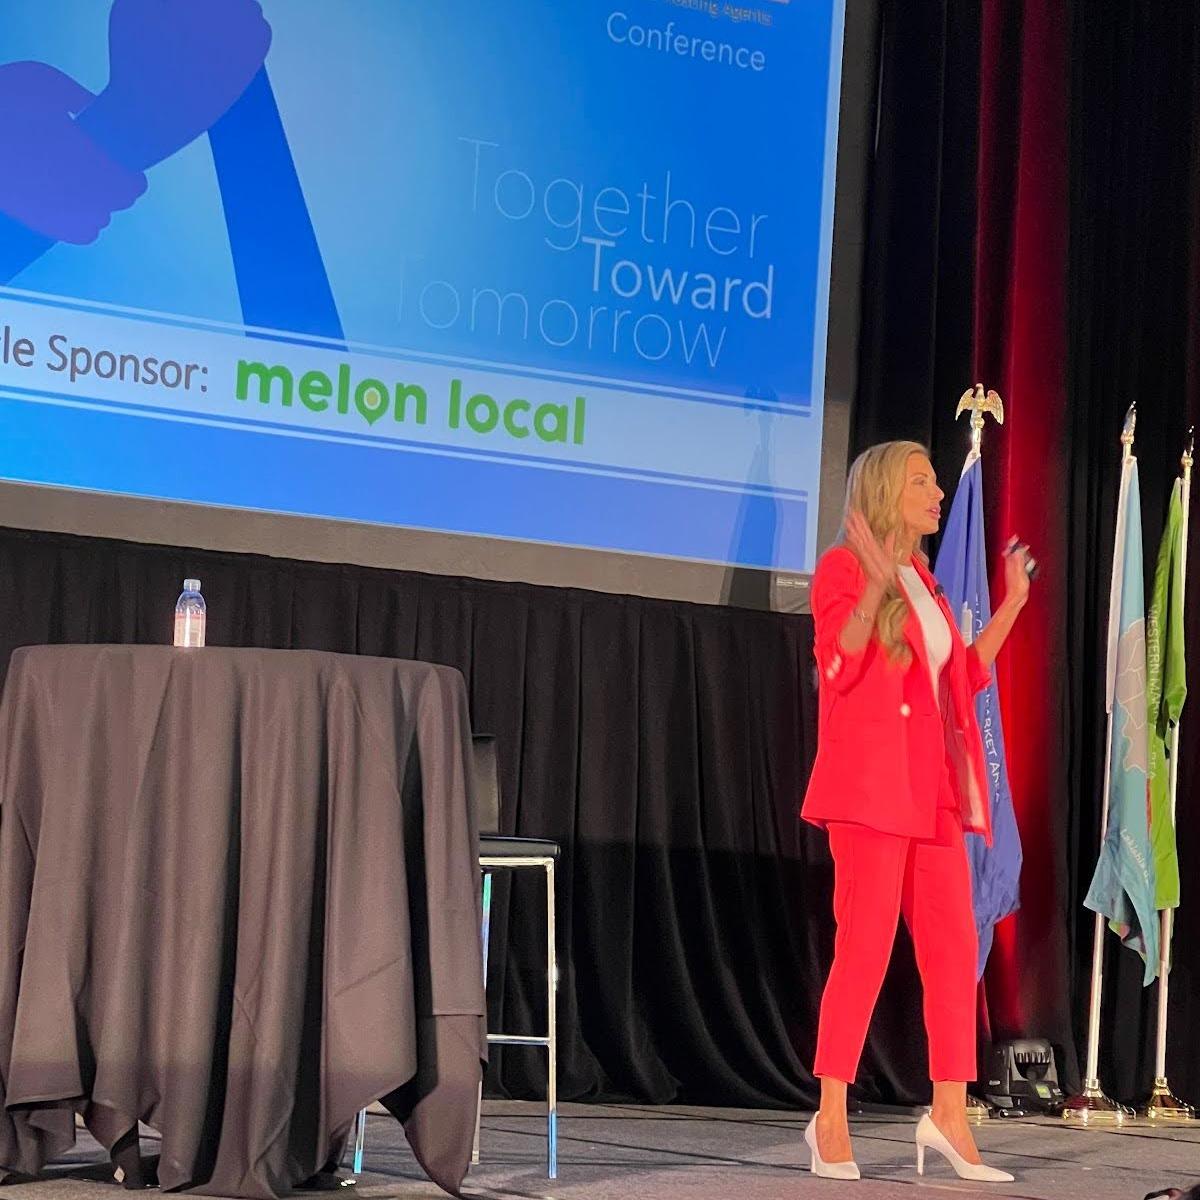 Whitney Green-Olson takes charge on stage